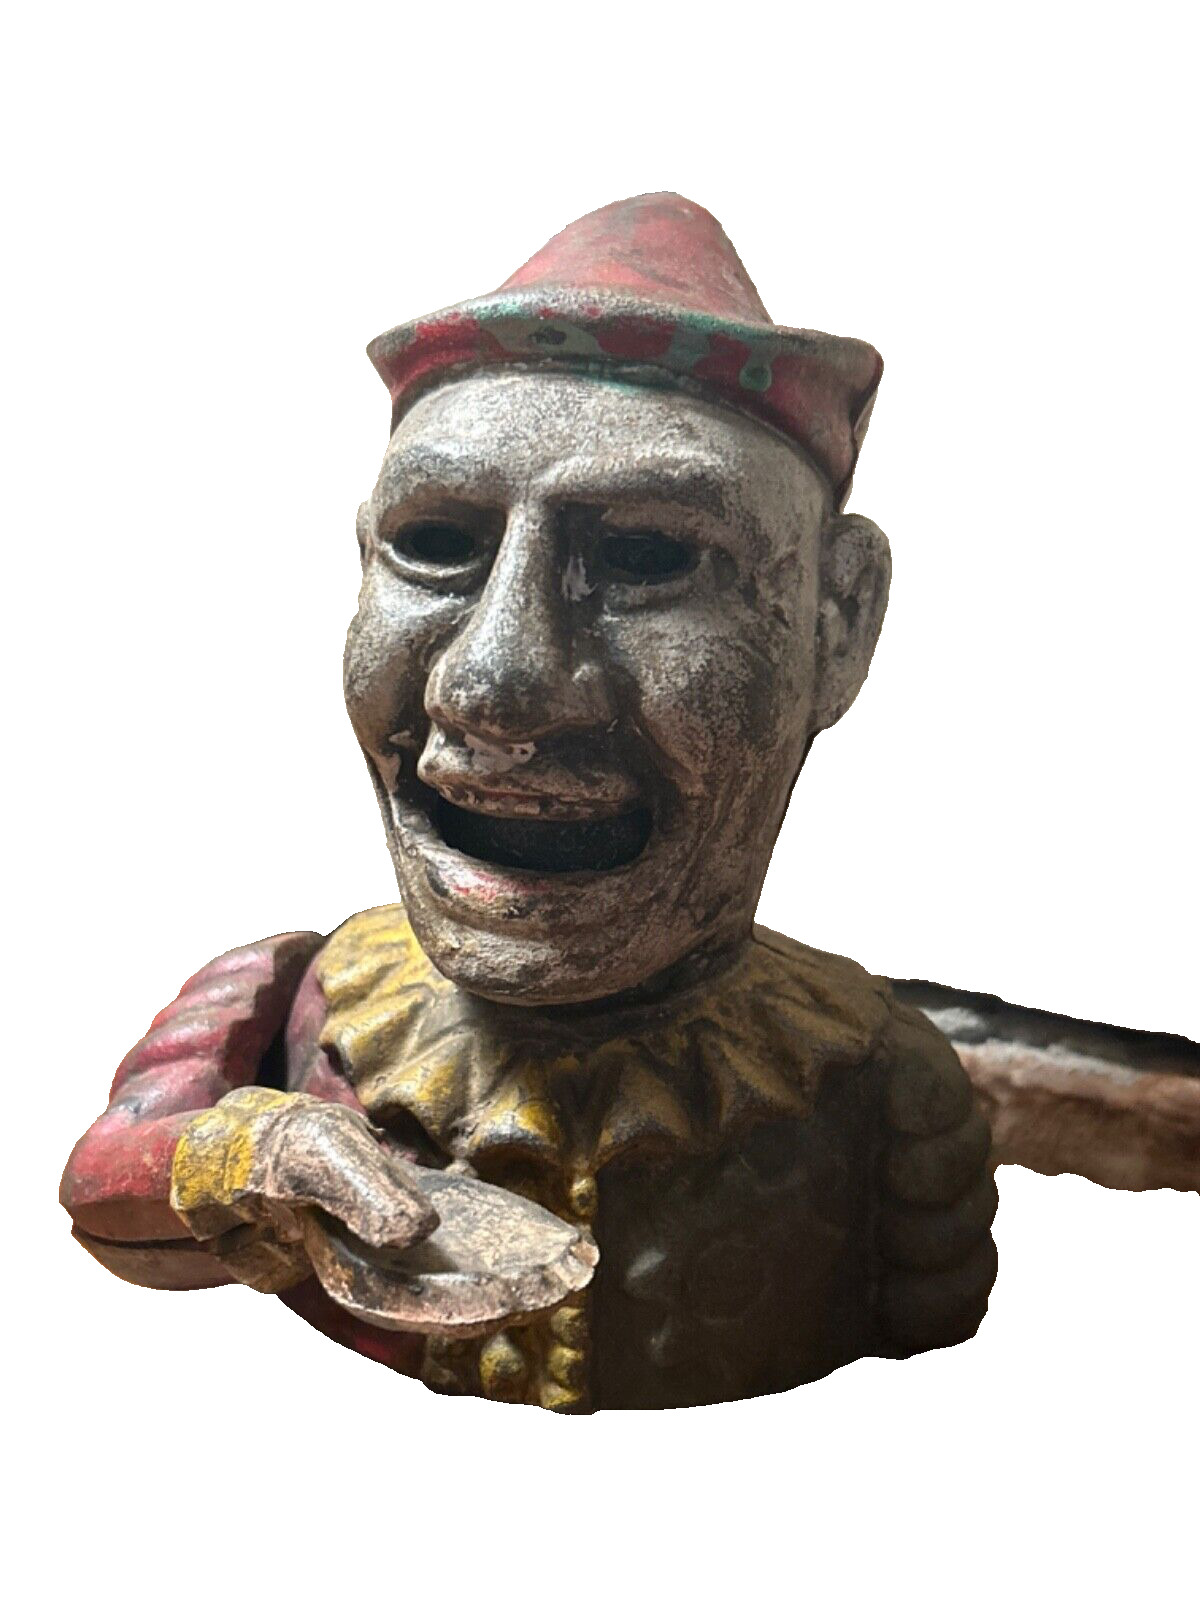 Early 1900s Humpty Dumpty Circus Clown Cast Iron Mechanical Bank Vintage Antique